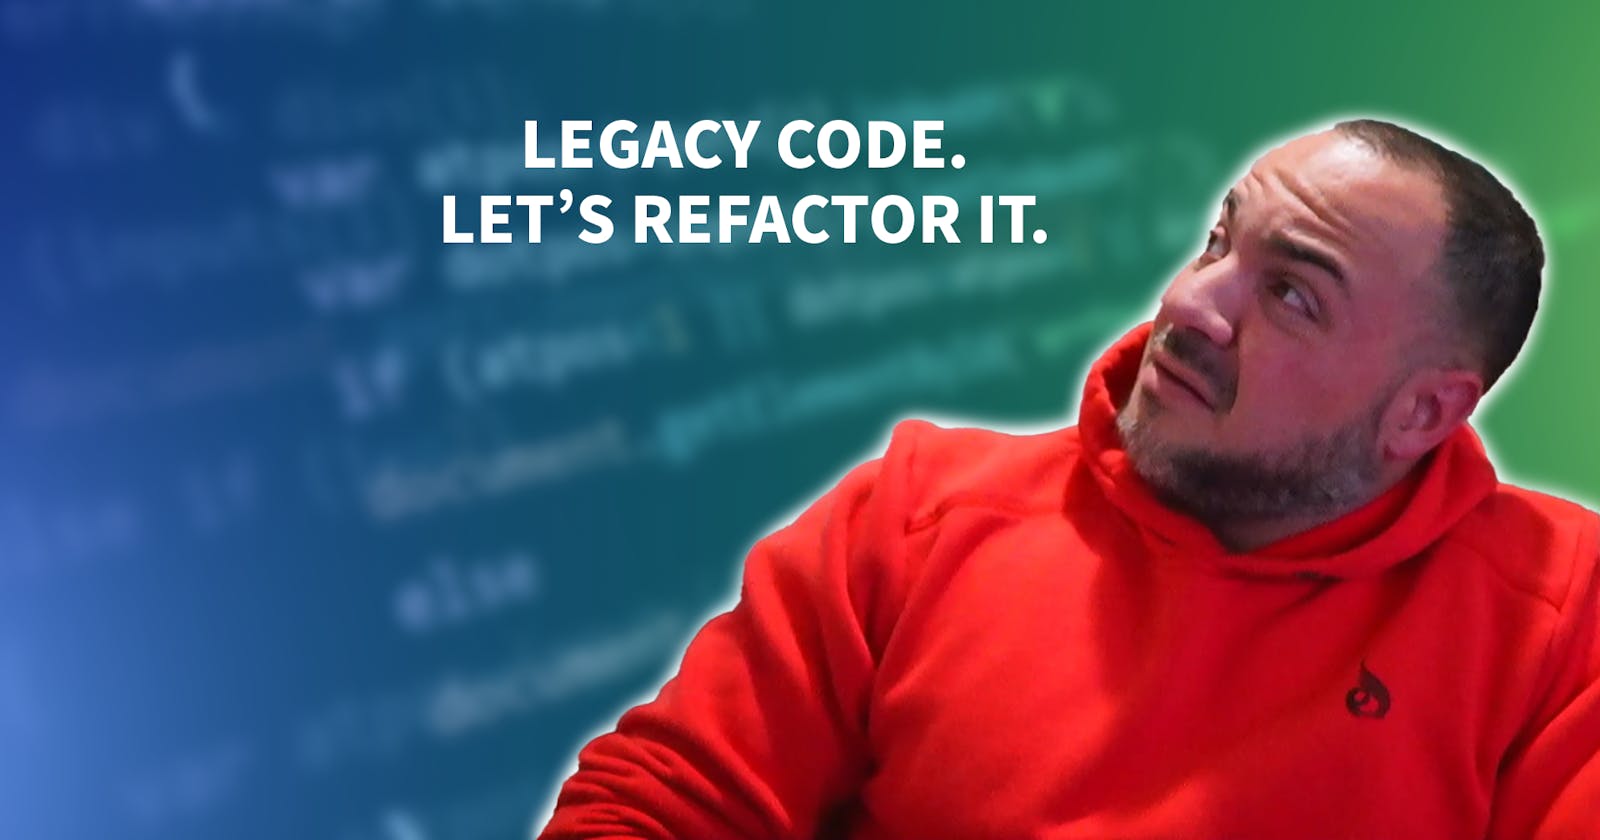 Refactoring Legacy Code – What You Need To Be Effective